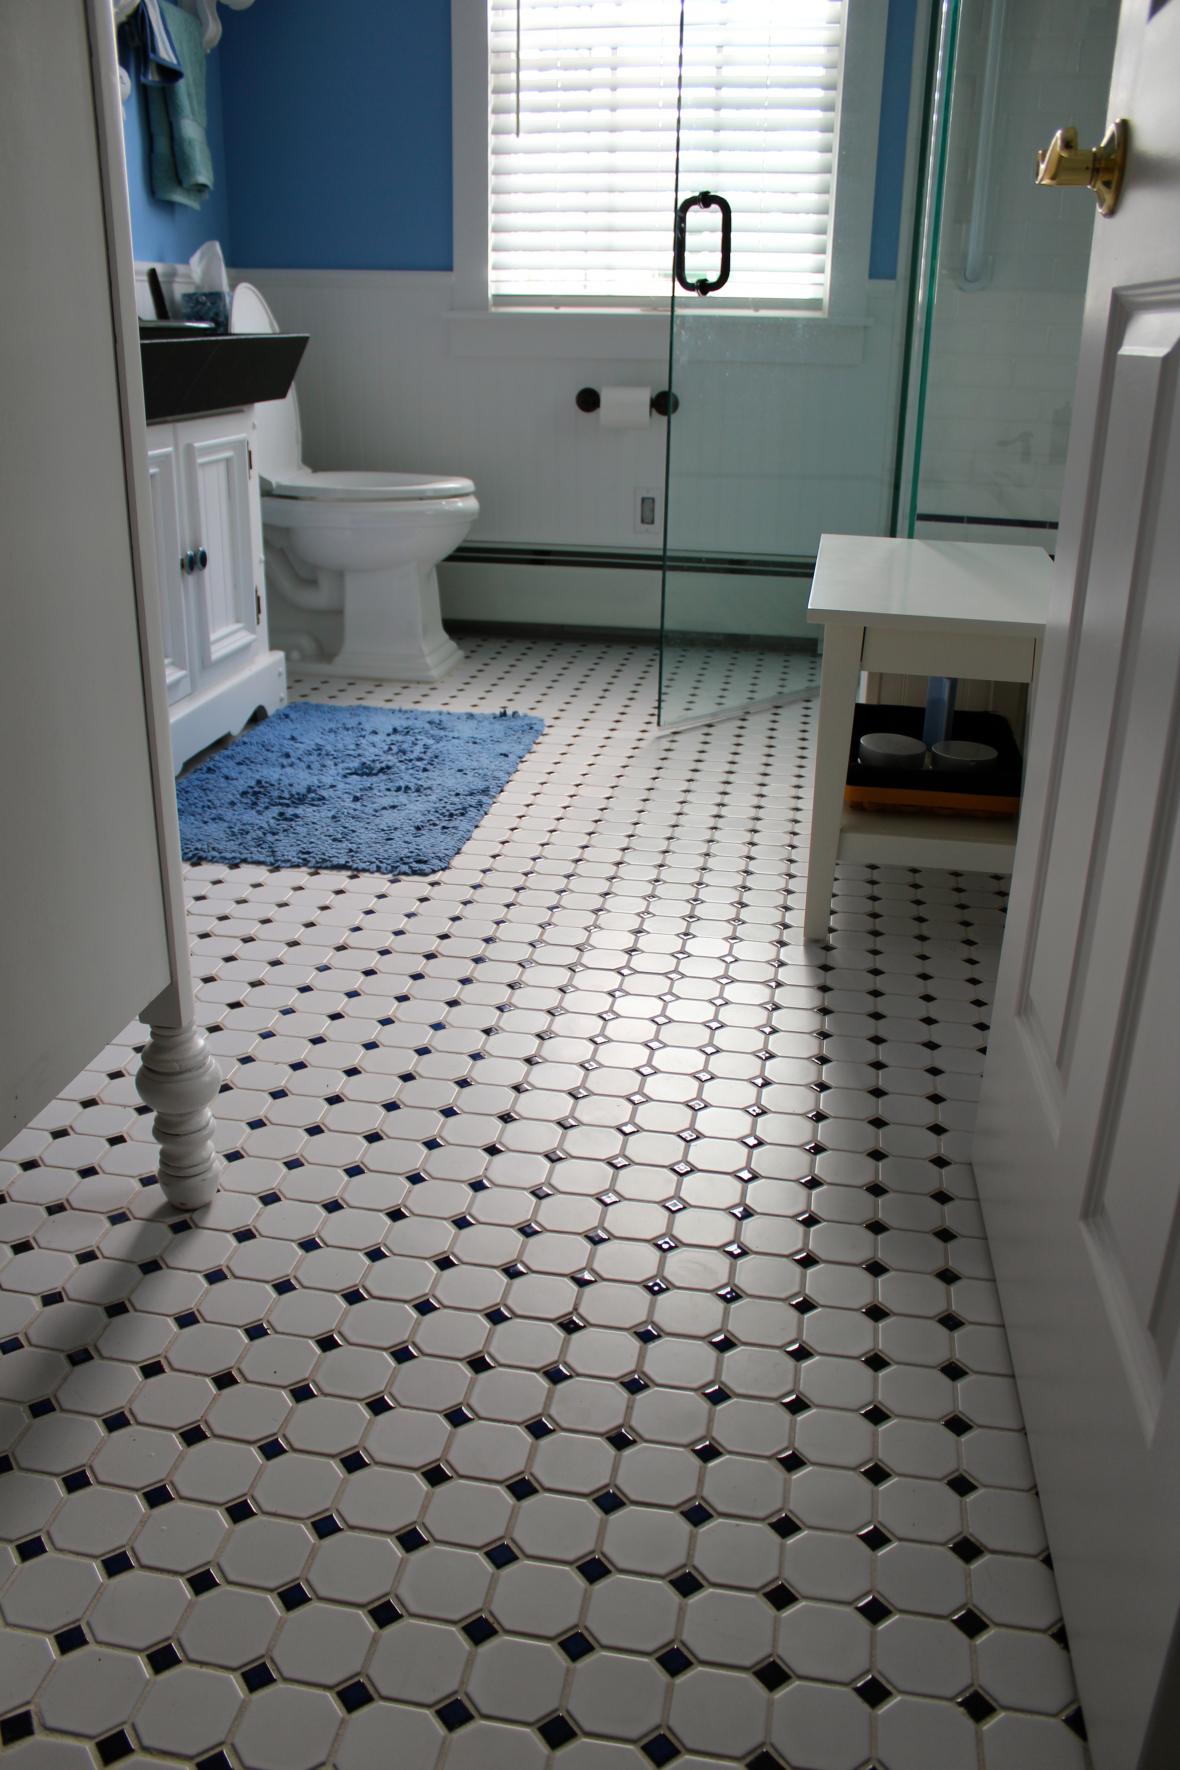 30 amazing pictures and ideas of 1950s bathroom floor tiles